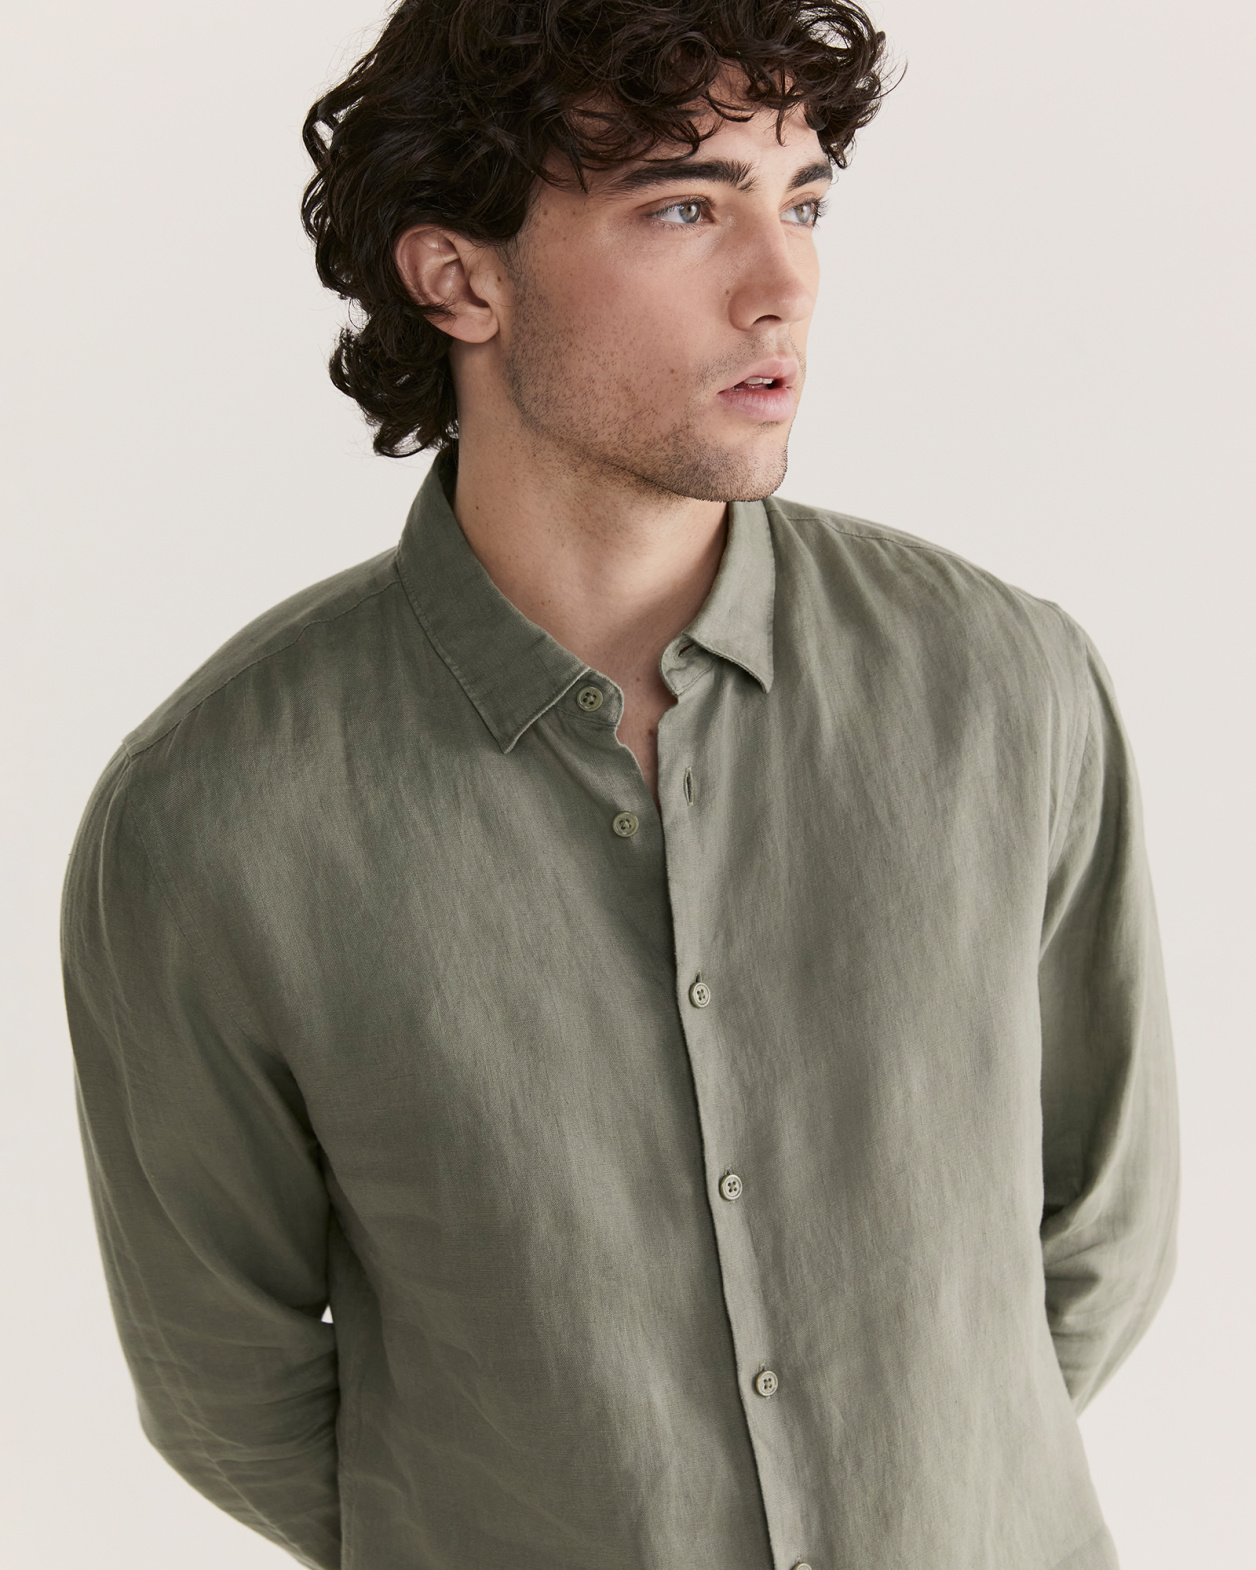 Anderson Long Sleeve Classic Linen Shirt in MOSS